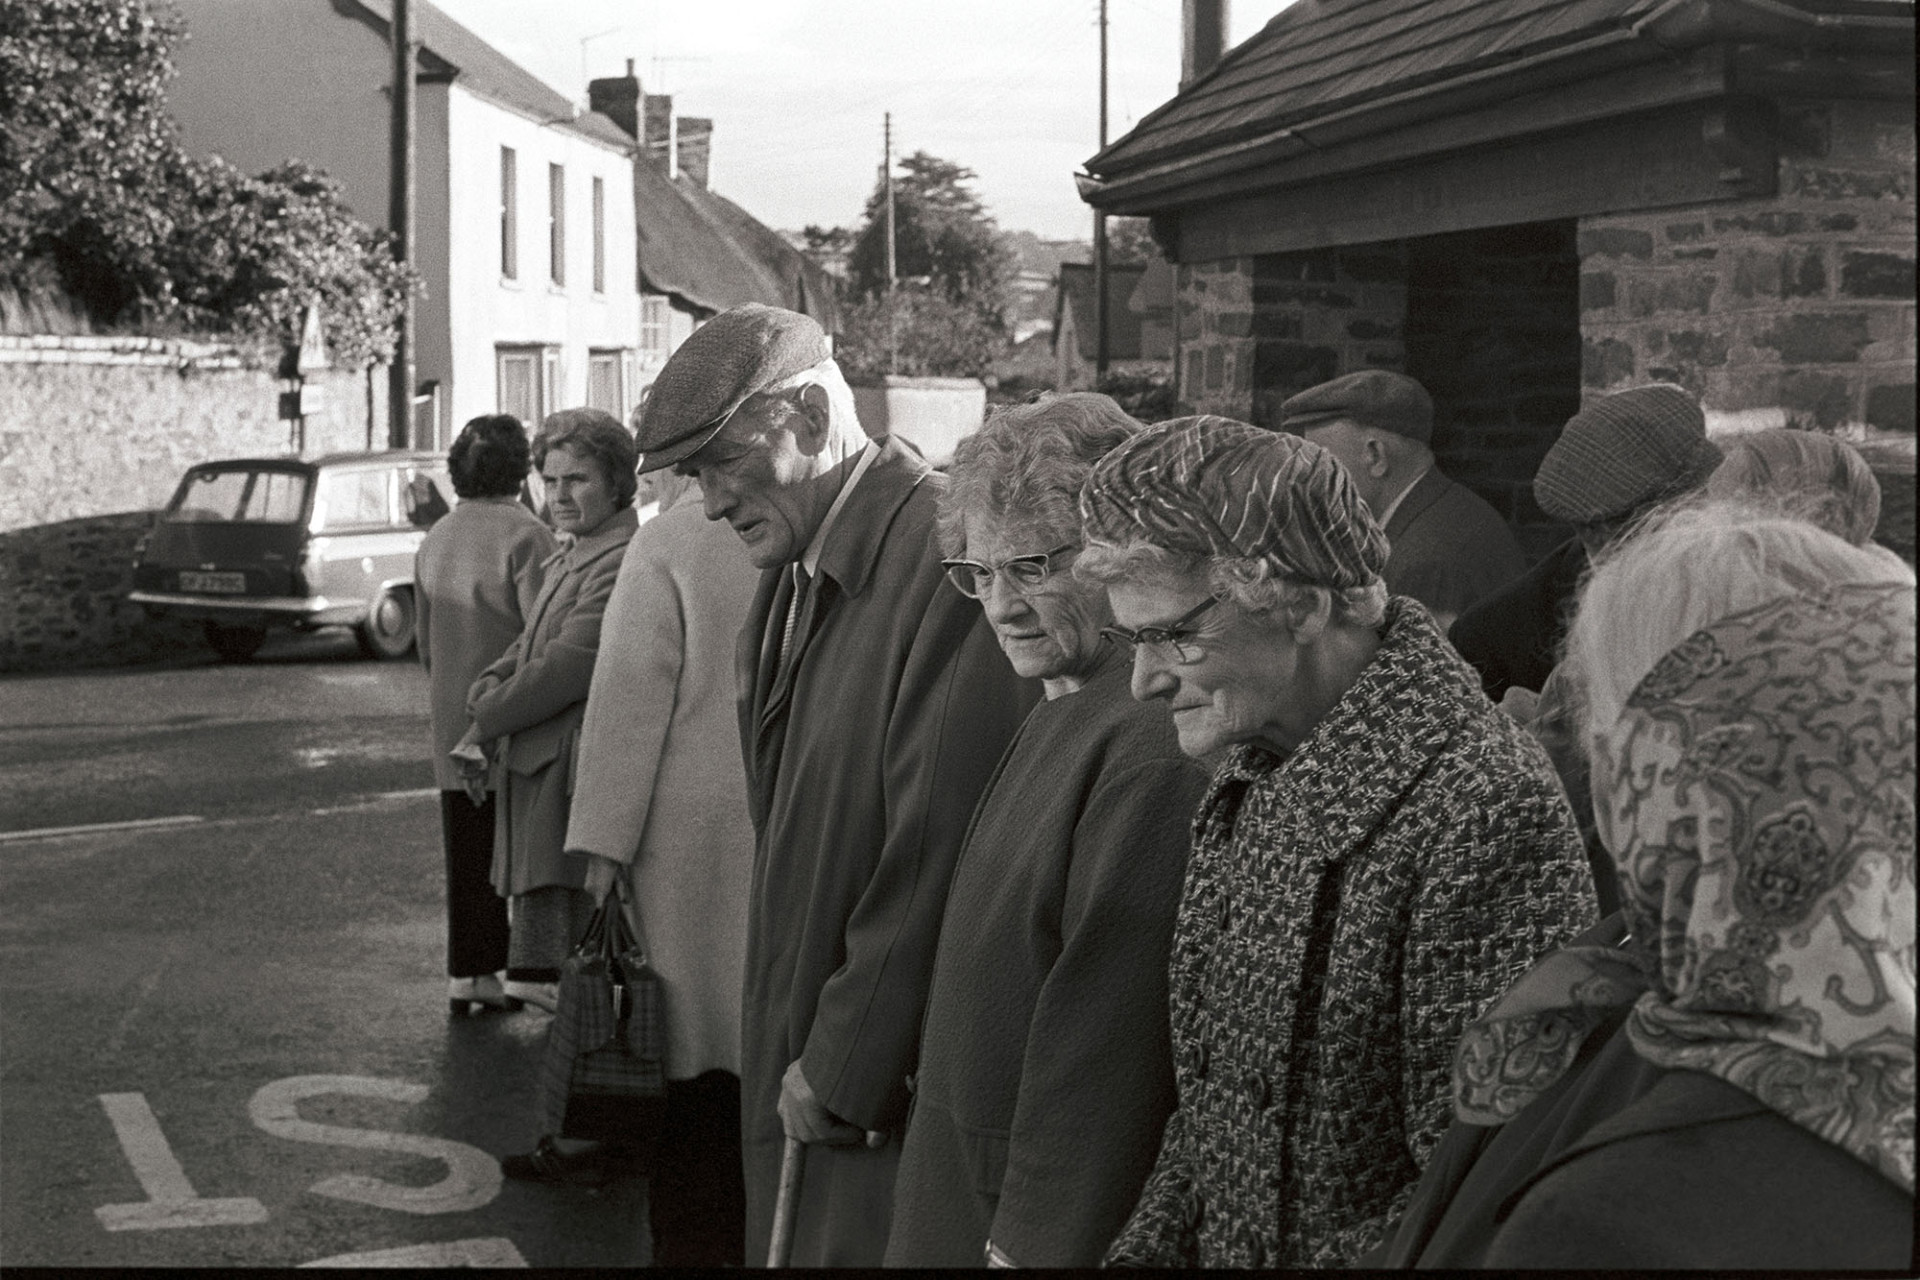 Over 60's club members about to go on bus outing, waiting in queue.
[A group of men and women from an Over 60's Club, standing in line at the bus stop in Dolton, waiting to go on a day trip.]